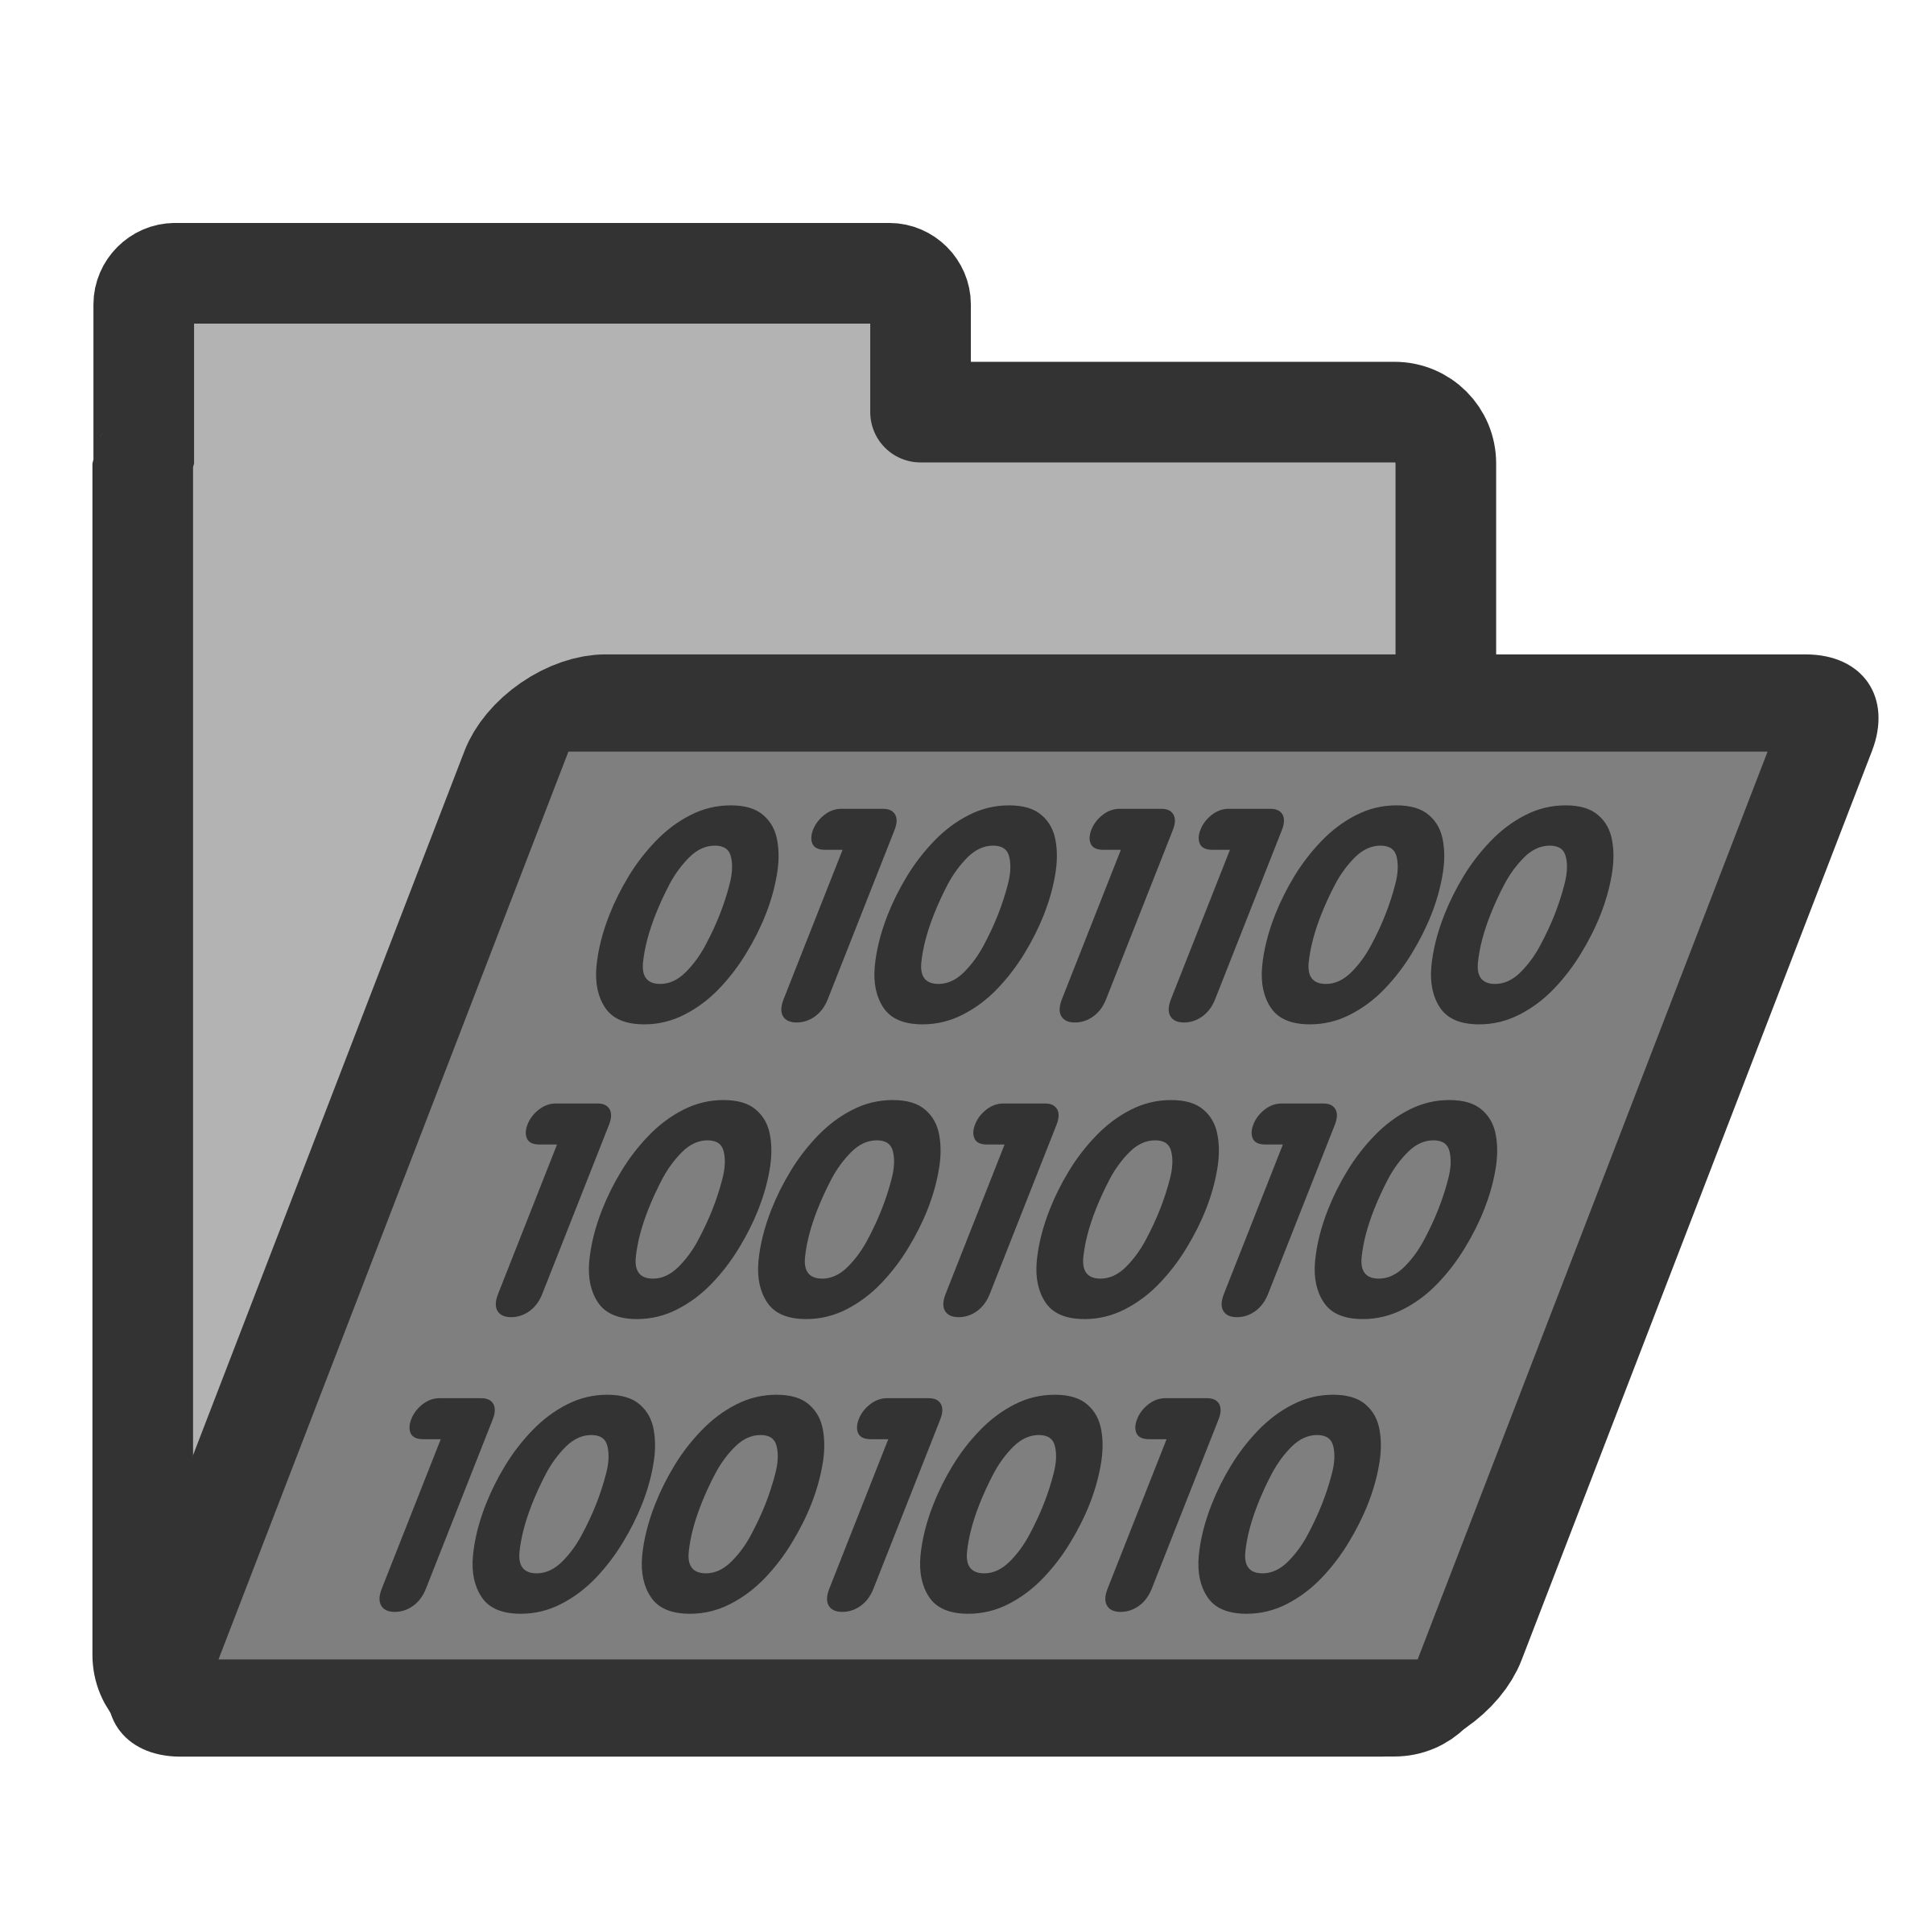 data clipart binary number